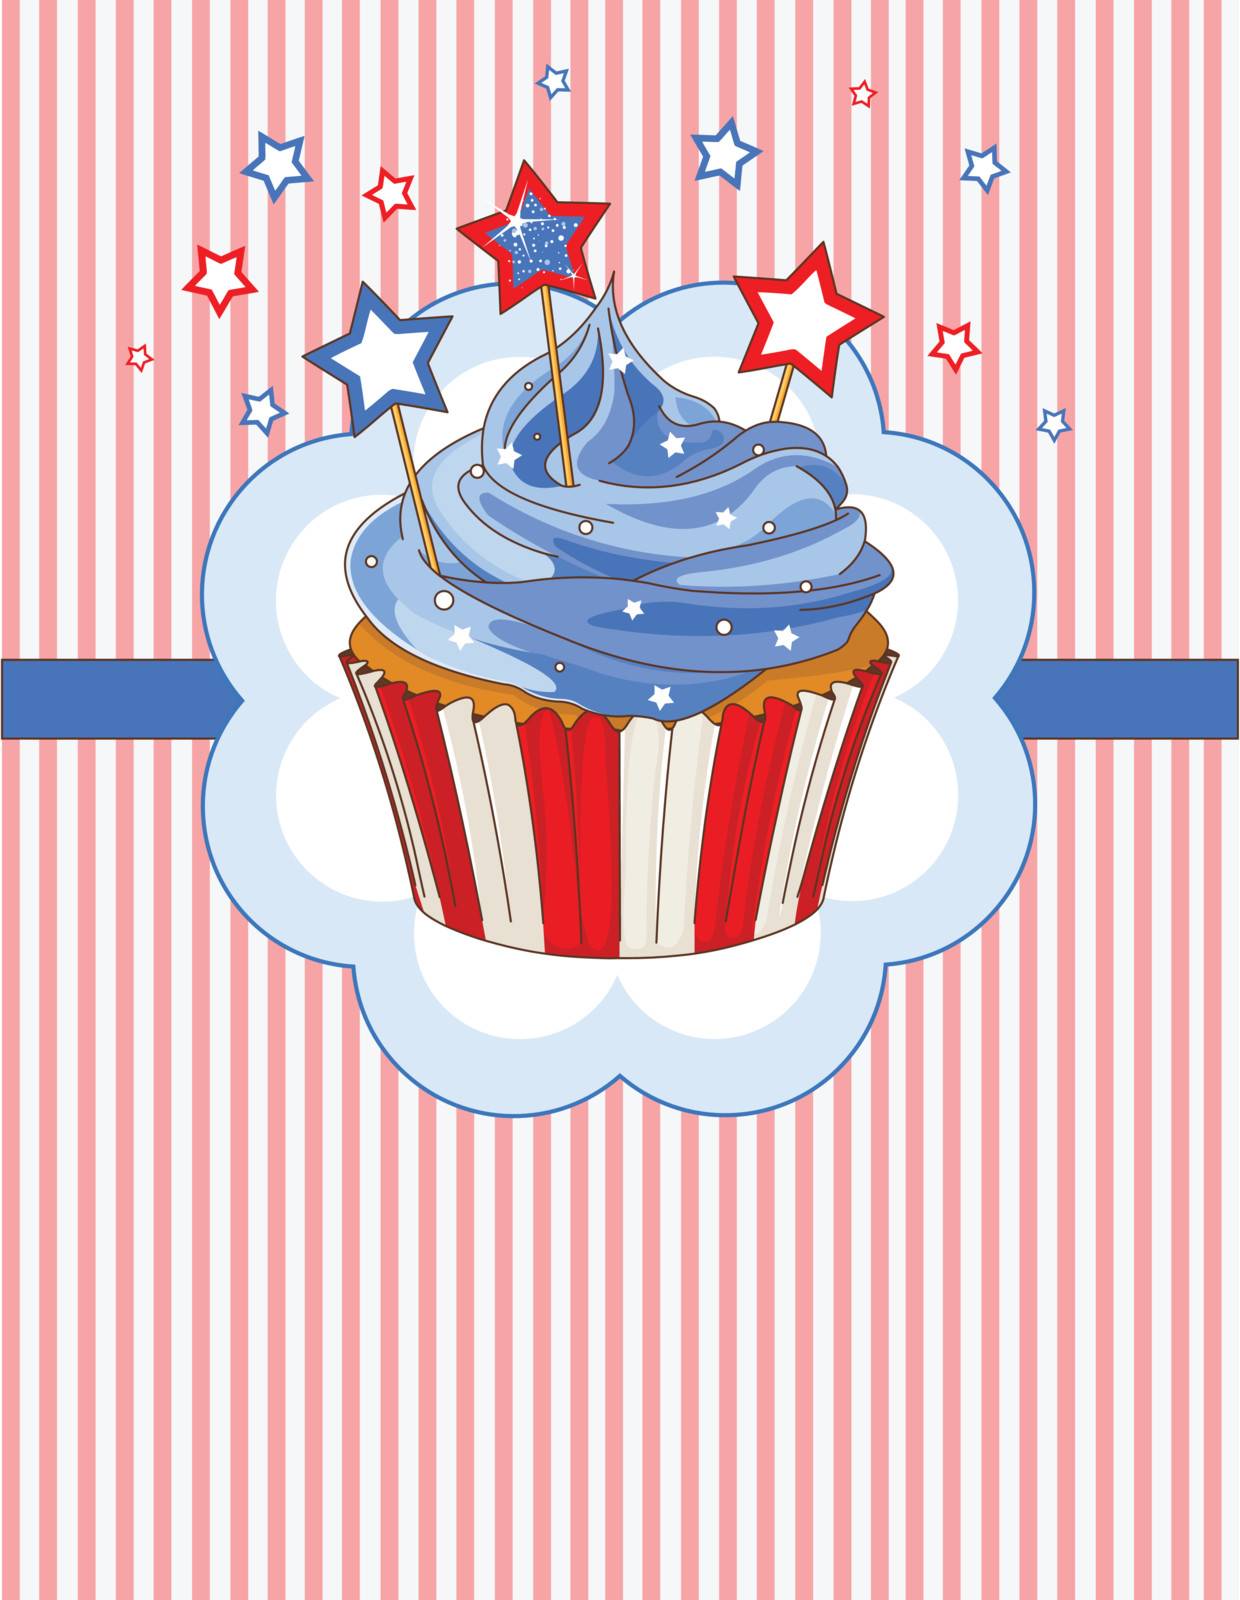 Patriotic cupcake with stars on the top place card